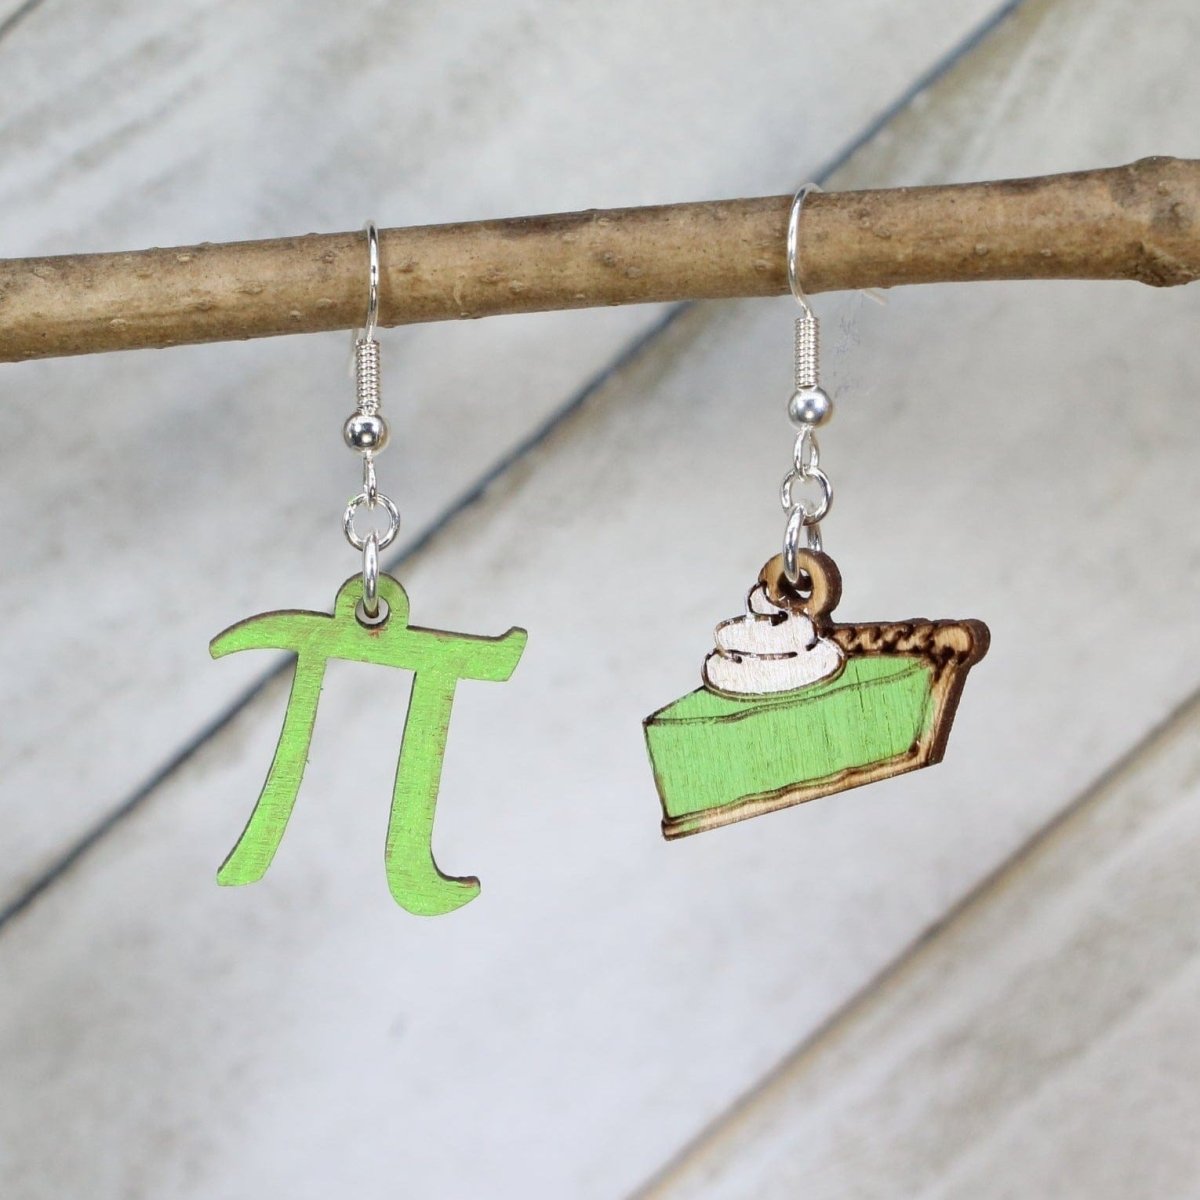 Pi & Pie Wooden Dangle Earrings - Green - Cate's Concepts, LLC